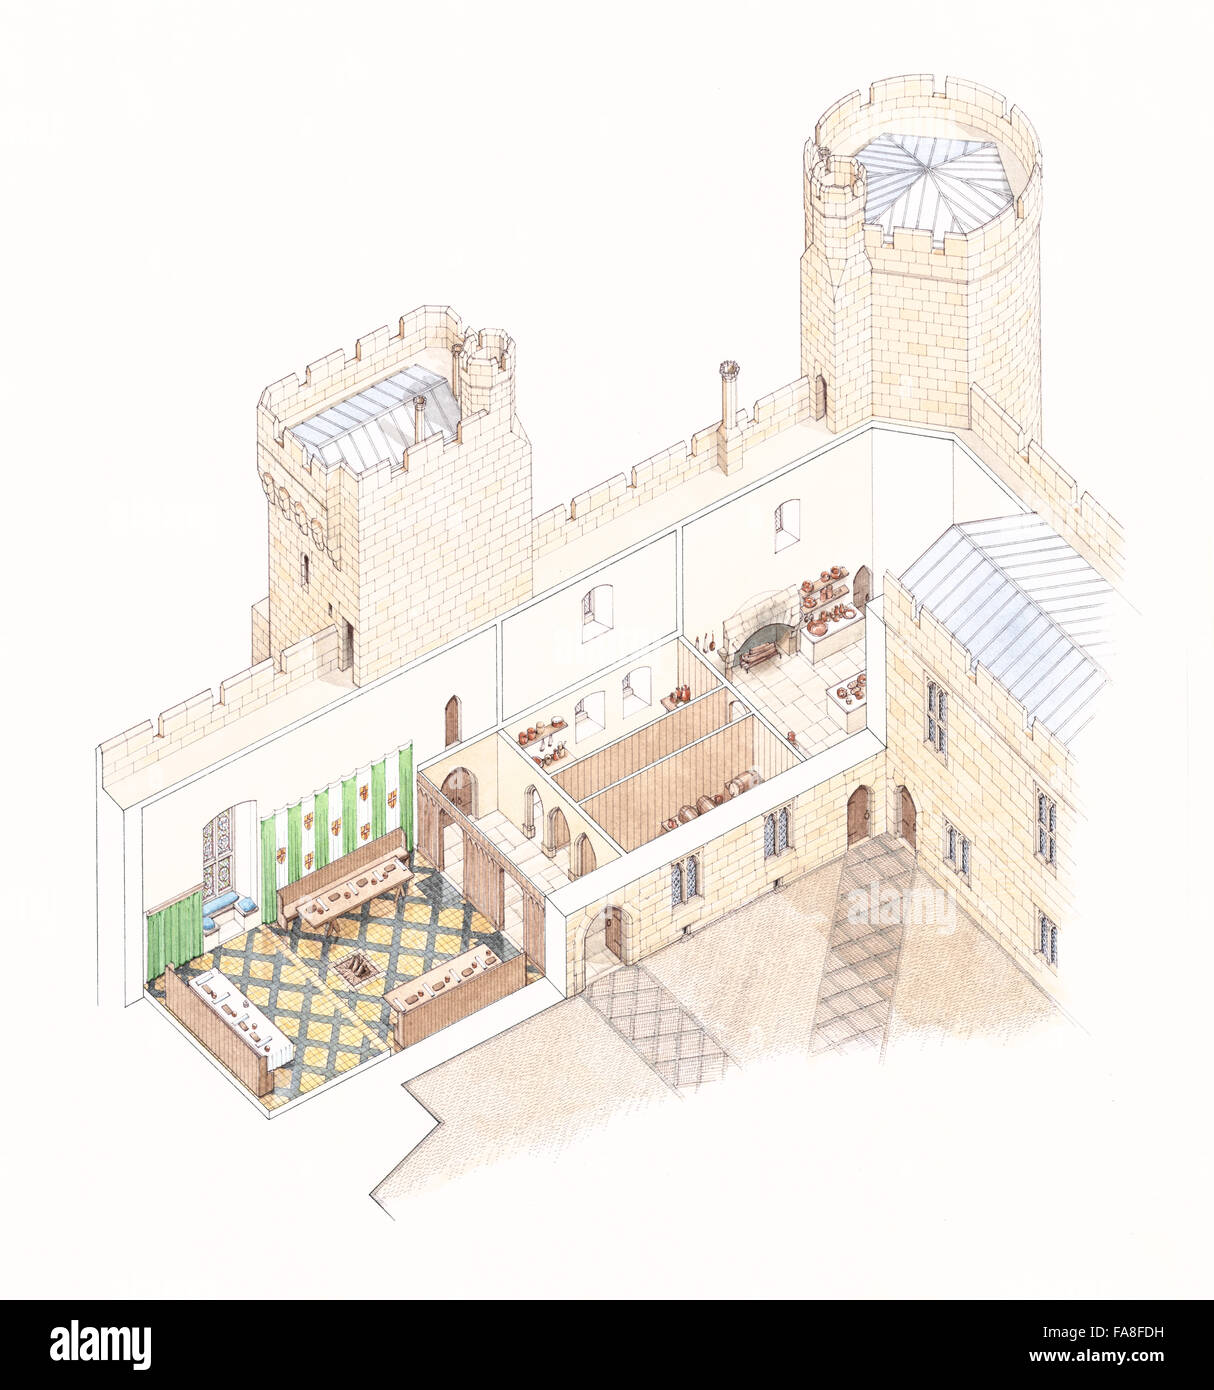 Cutaway reconstruction section drawing of The Great Hall range at Bodiam Castle, East Sussex. Illustration by Stephen Conlin. Stock Photo